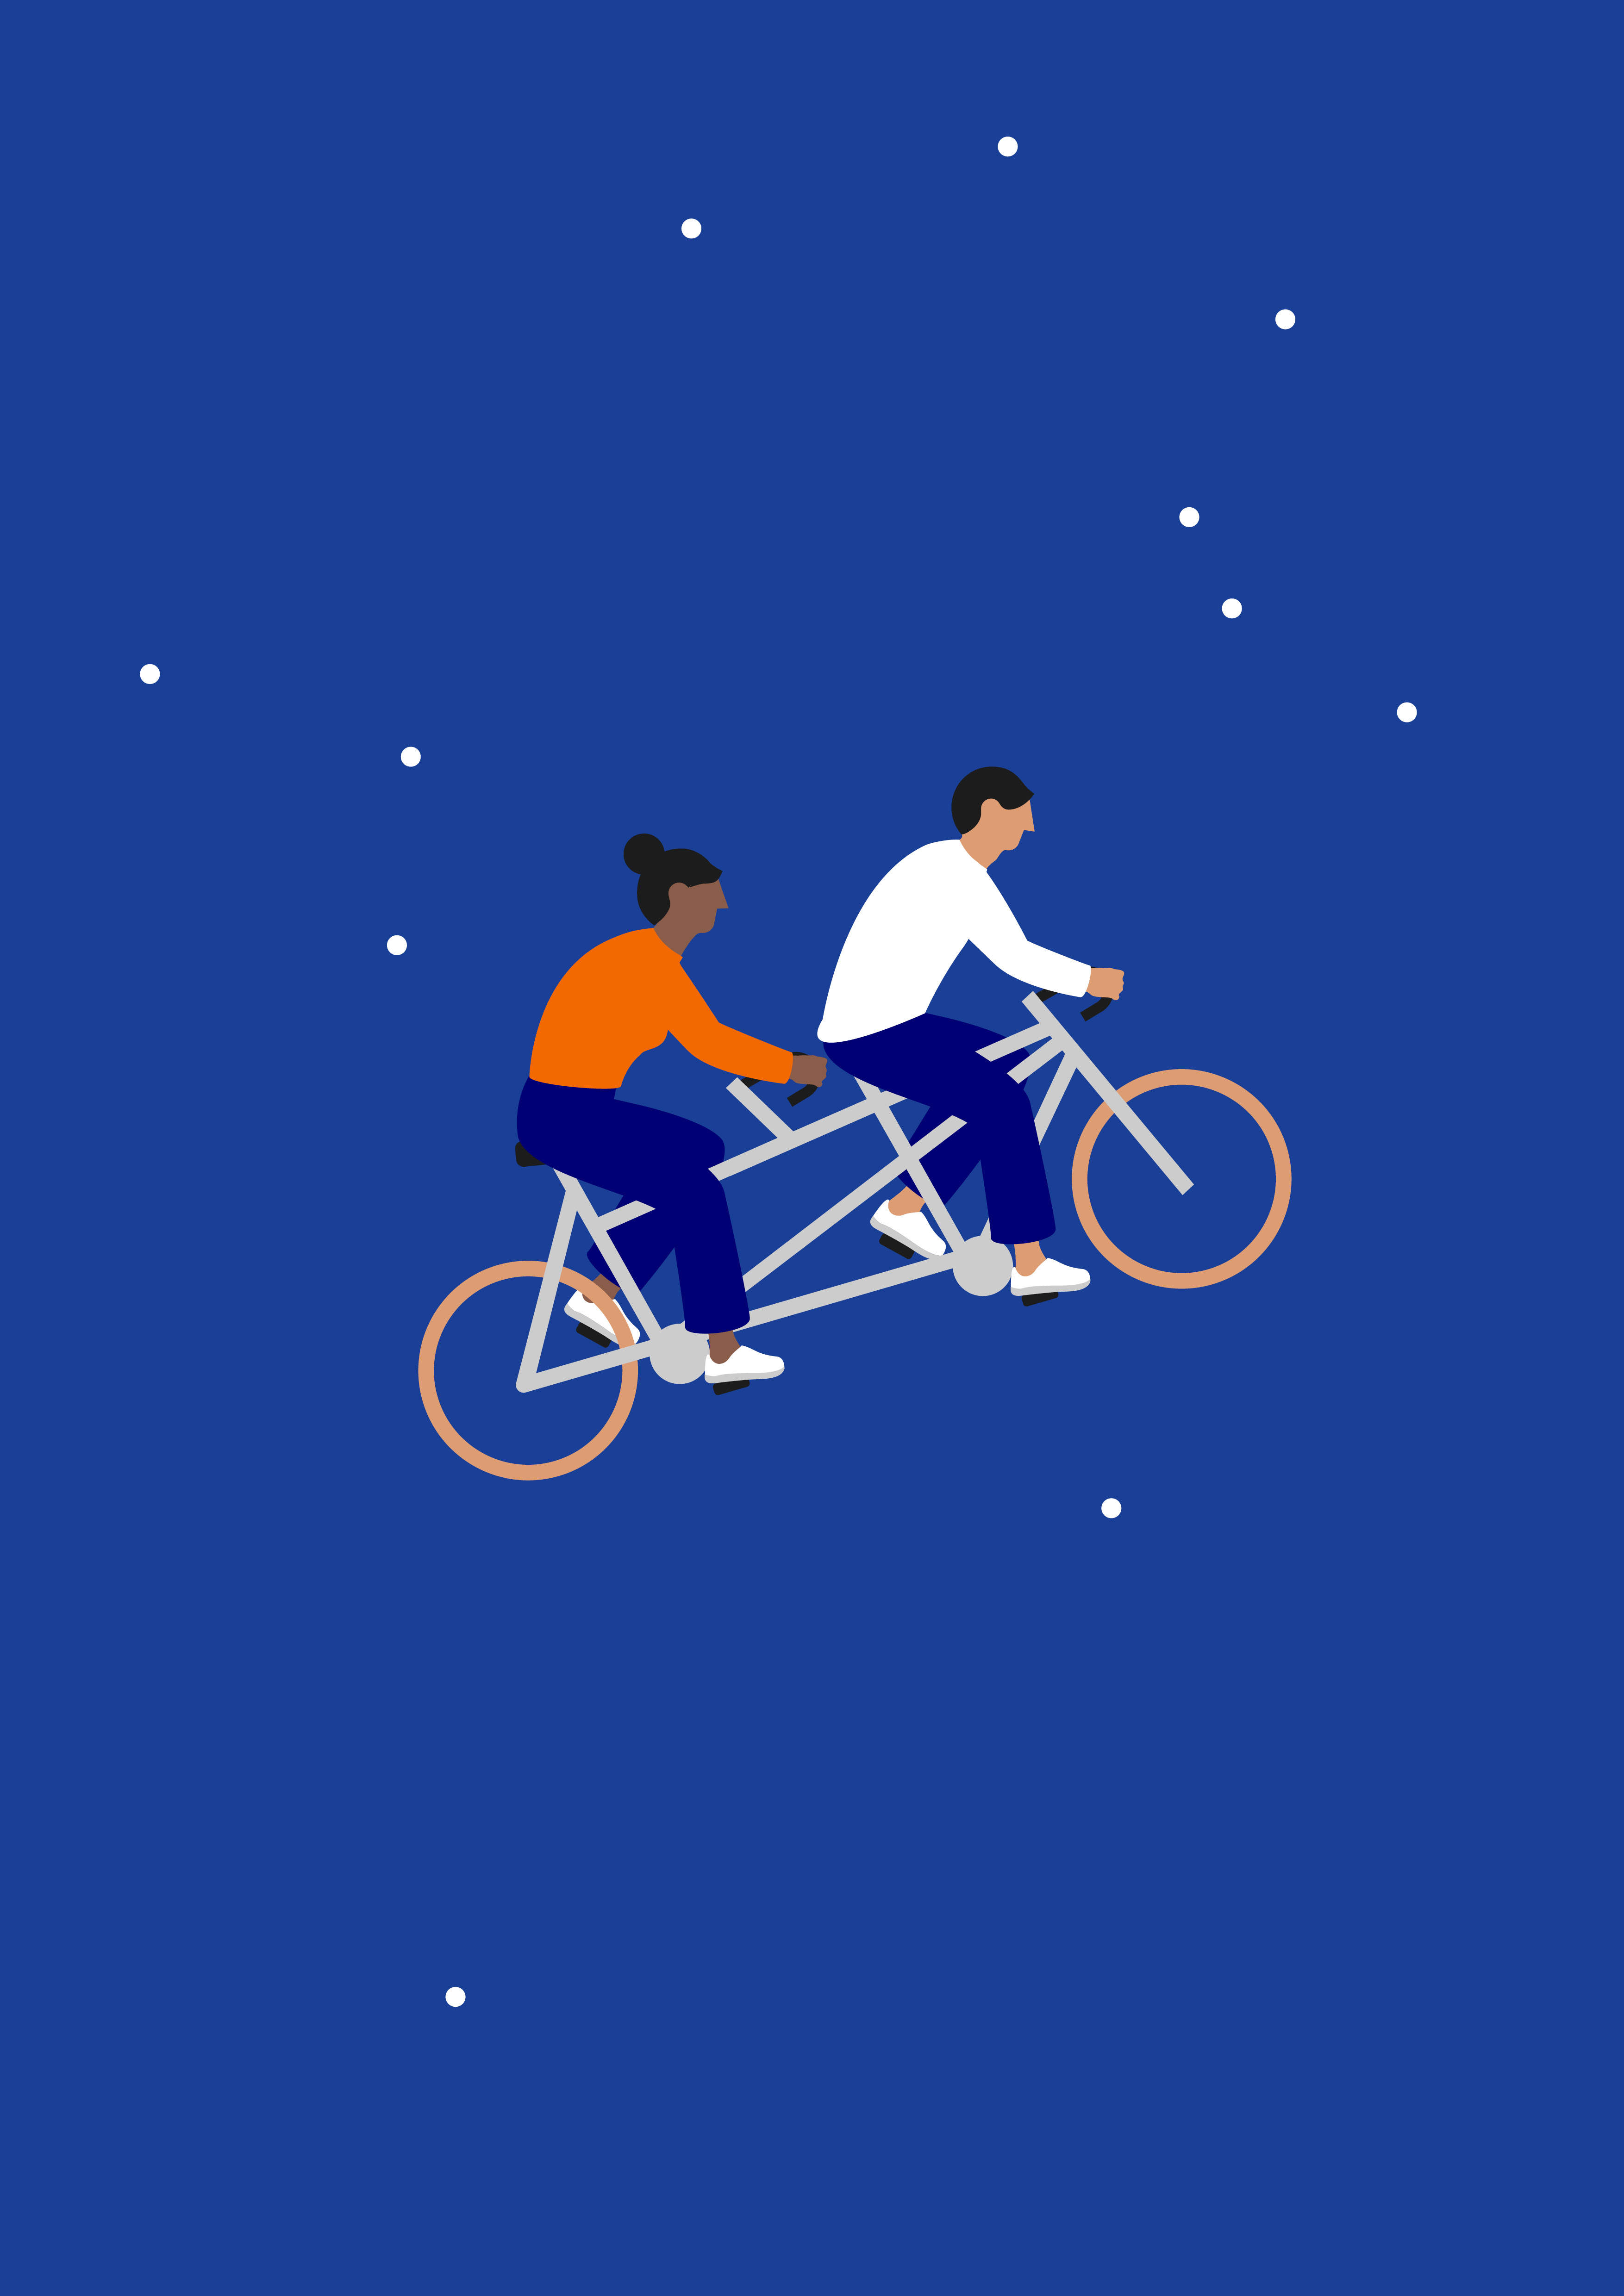 a twin-bicycle with two persons climbing for the stars.